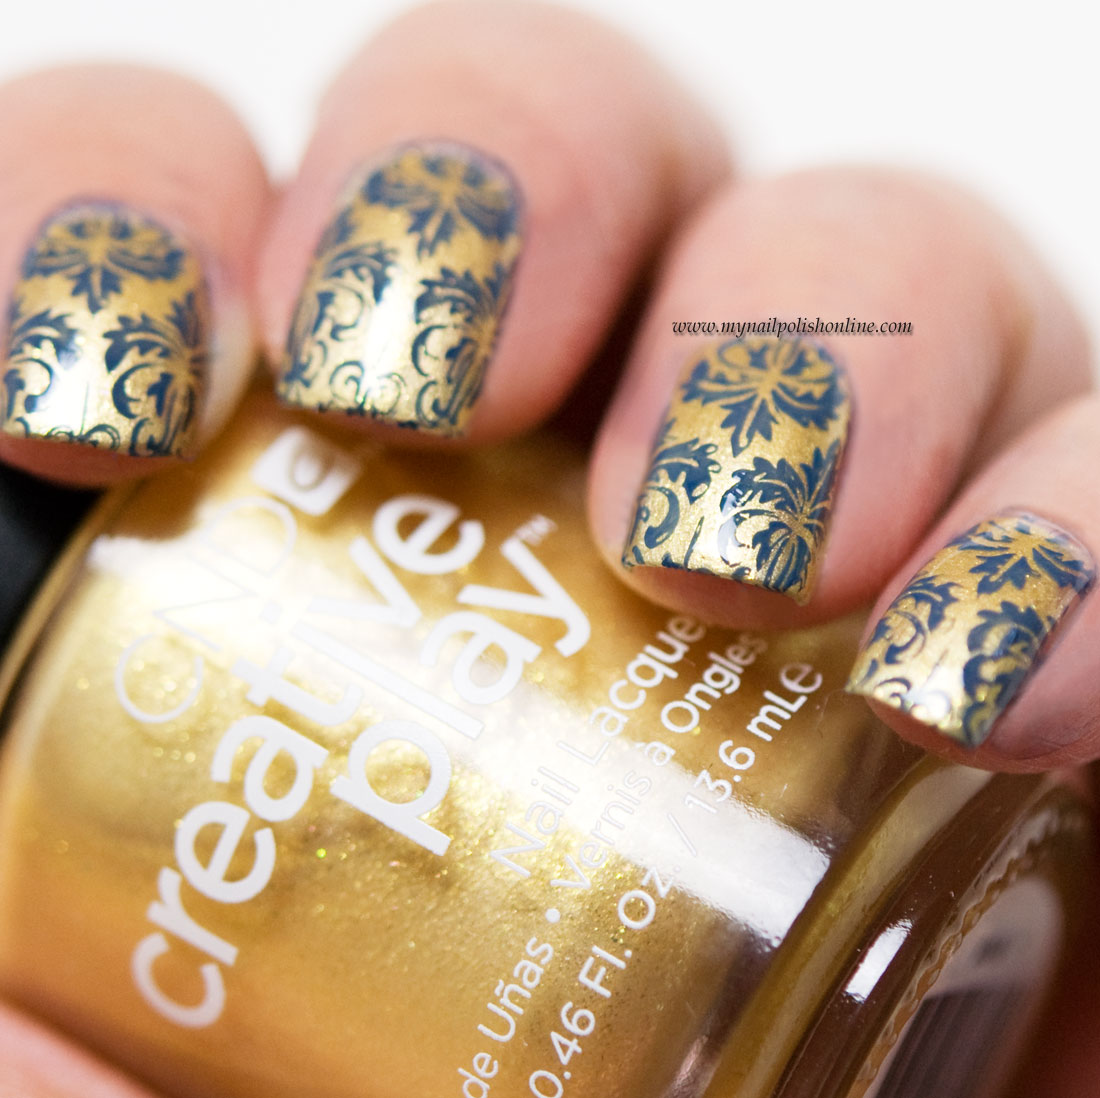 Nail art with stamping